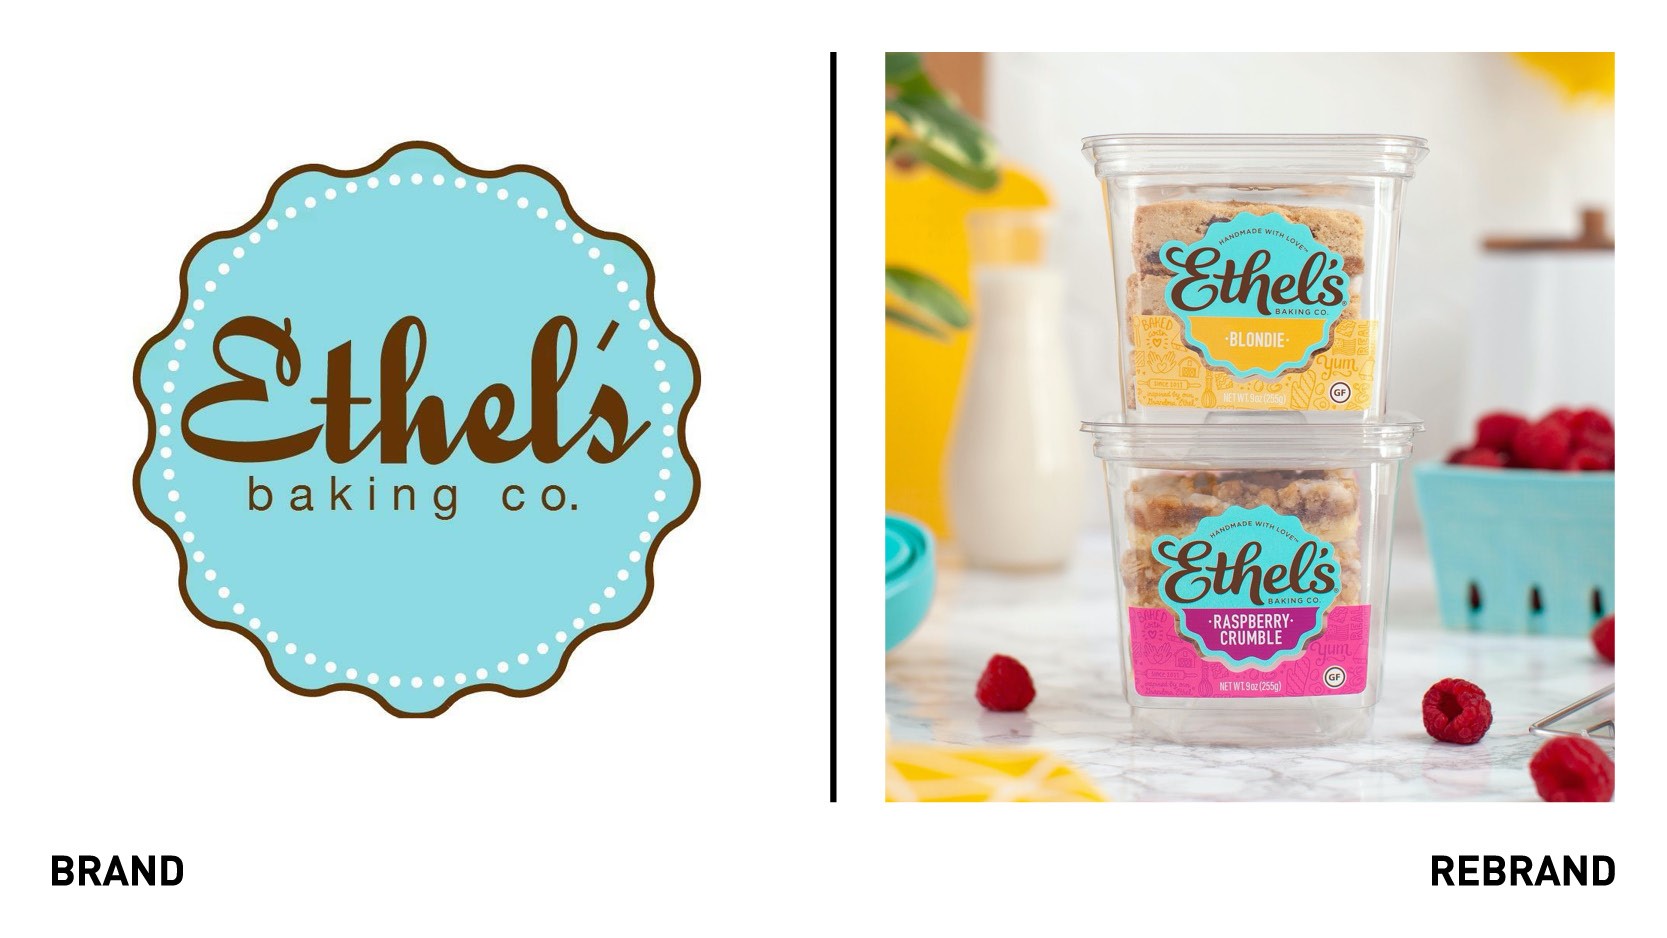 Transform magazine: Little Big Brands designs new packaging for Ethel's  Baking Co. - 2021 - Articles